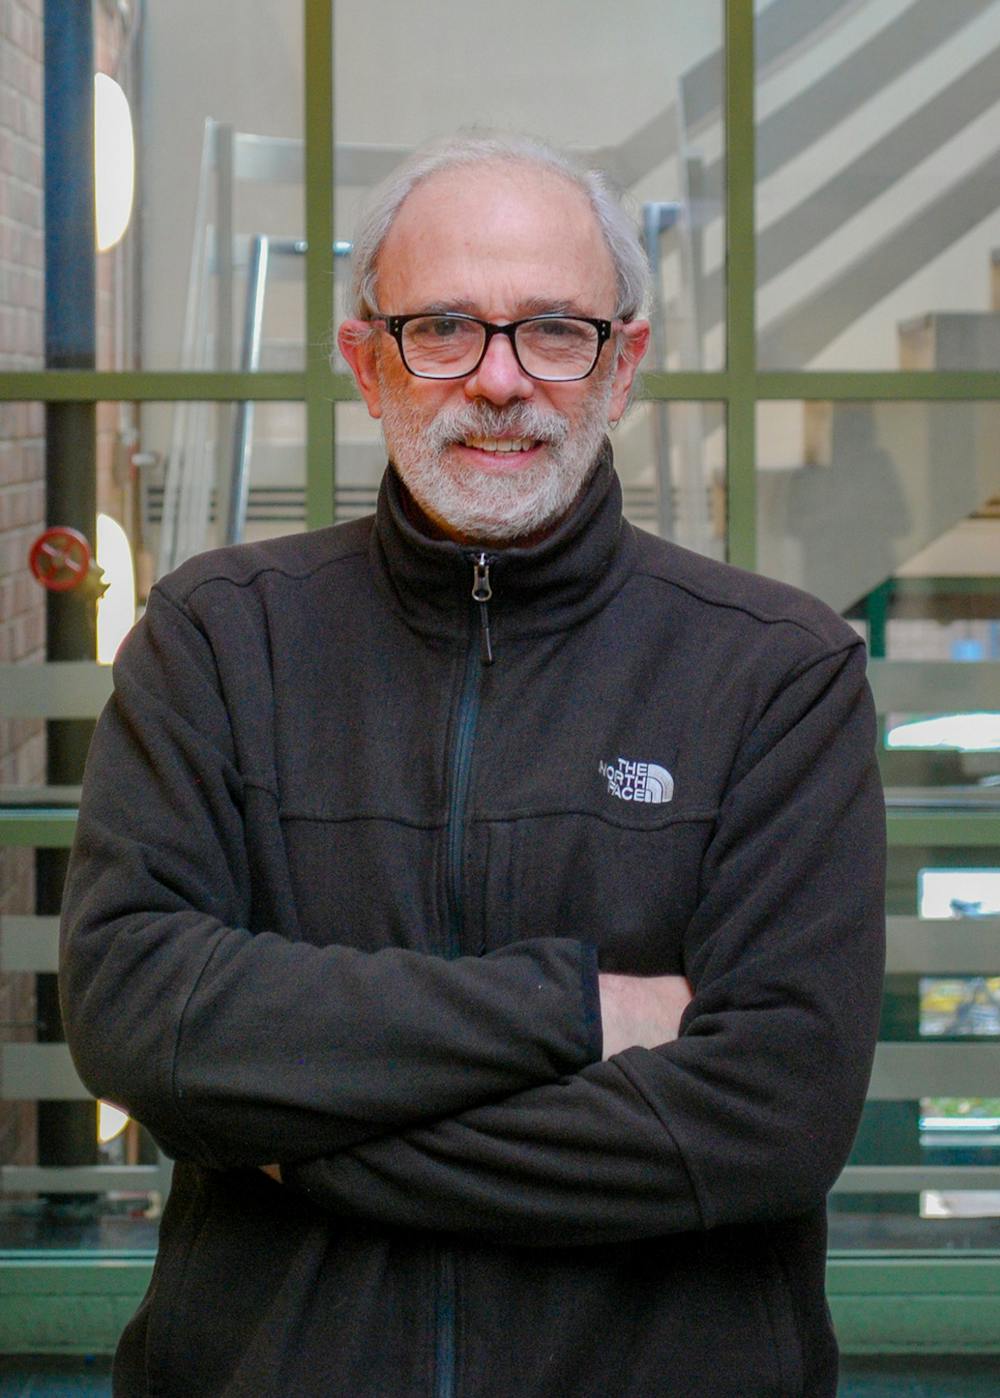 <p>Alberto Saal, professor of earth, environmental and planetary sciences, initially thought the email notifying him of his election to the American Academy of Arts and Sciences was spam.</p><p>Courtesy of Alberto Saal﻿</p>